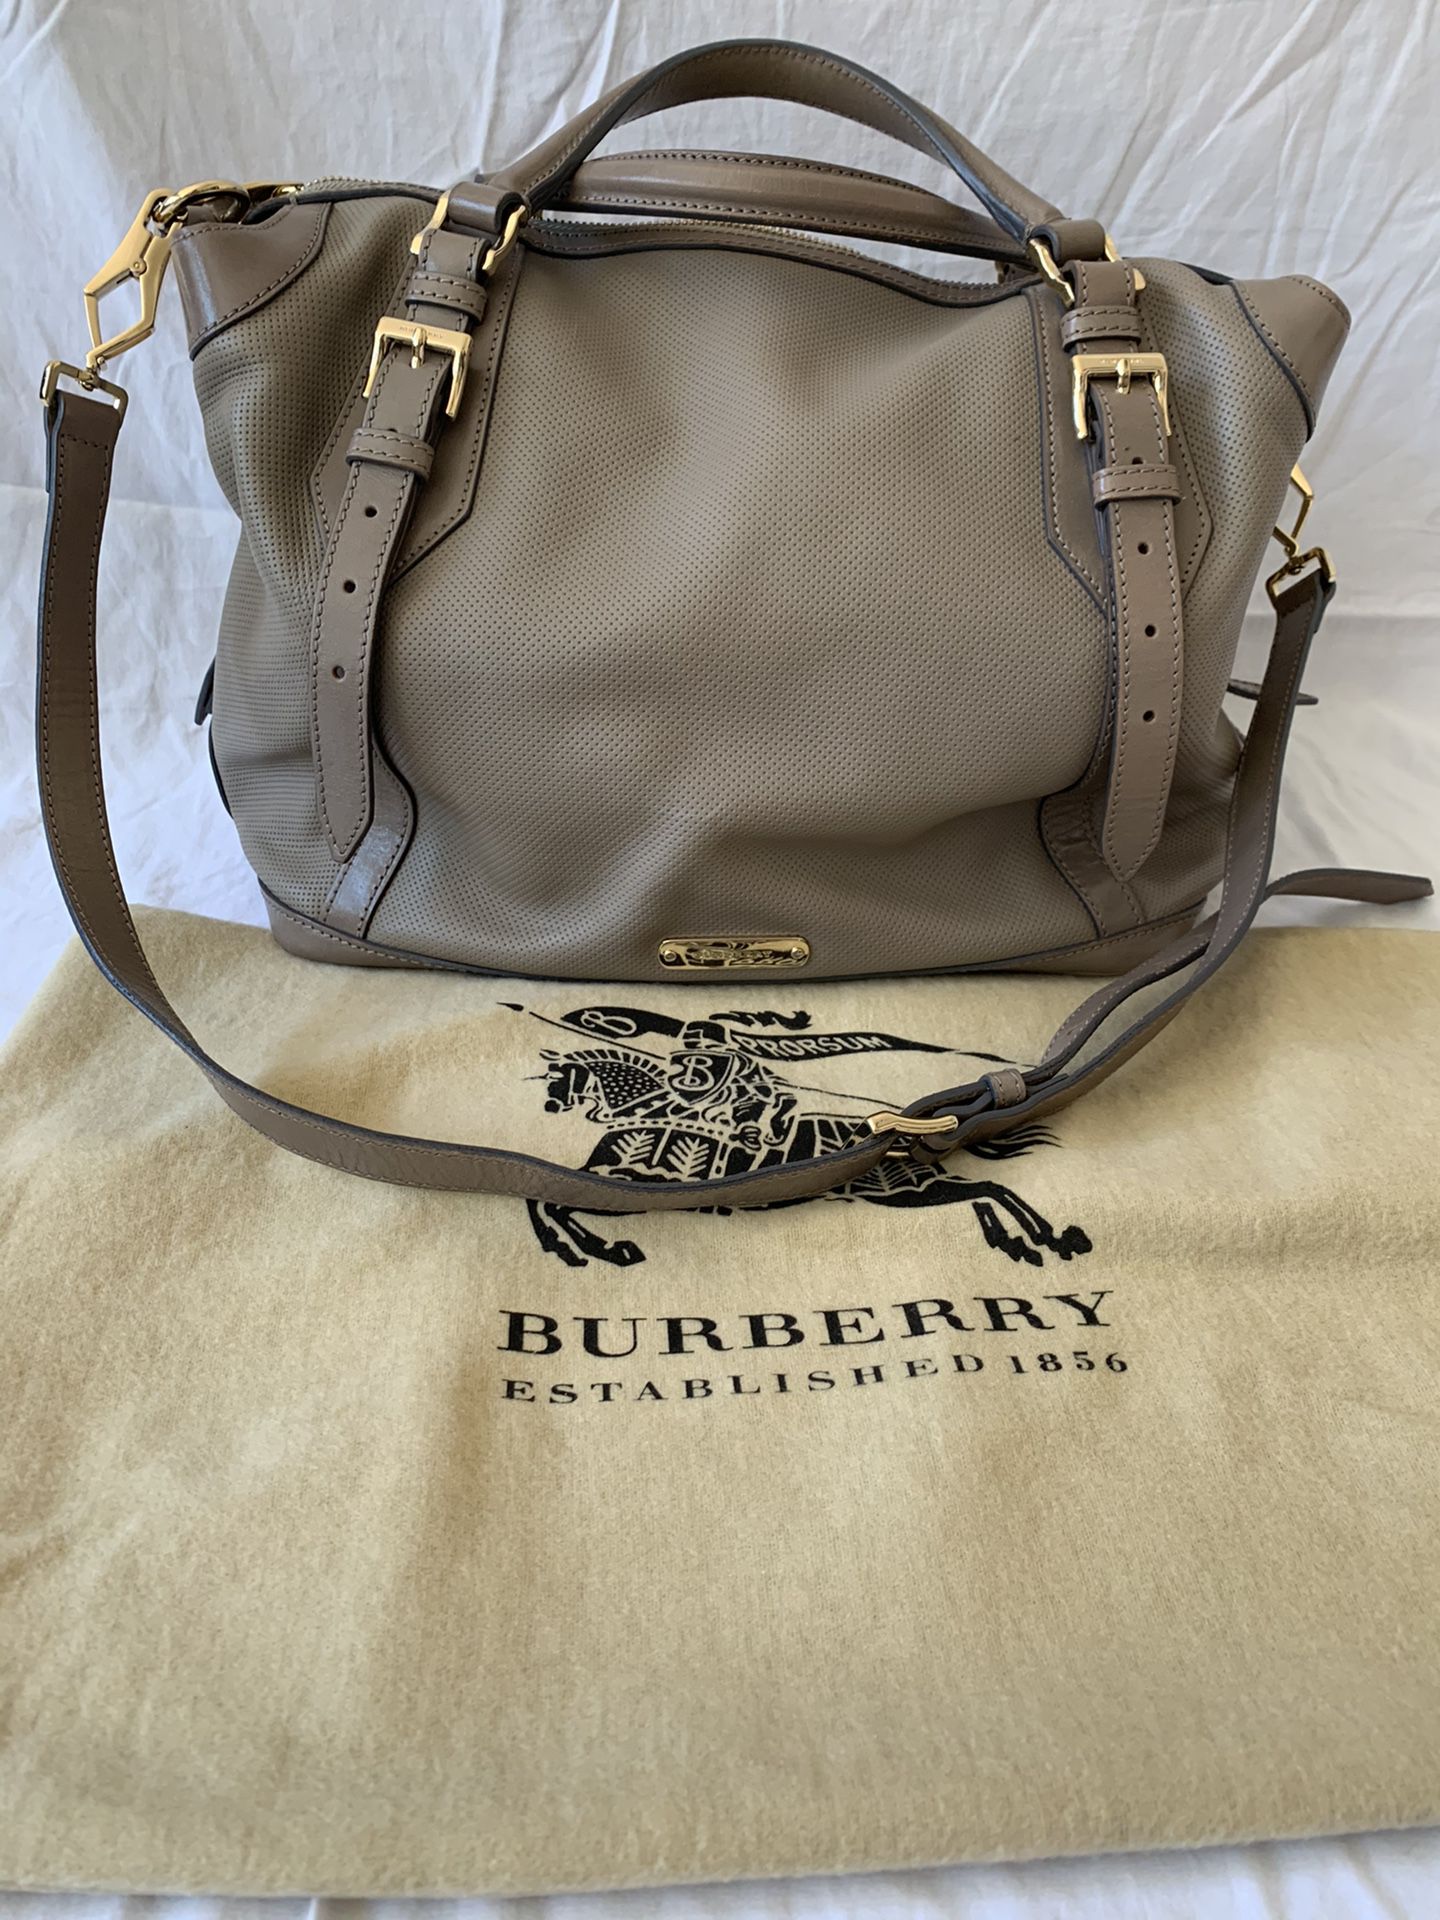 Authentic Burberry bag SERIOUS REAL BUYERS ONLY